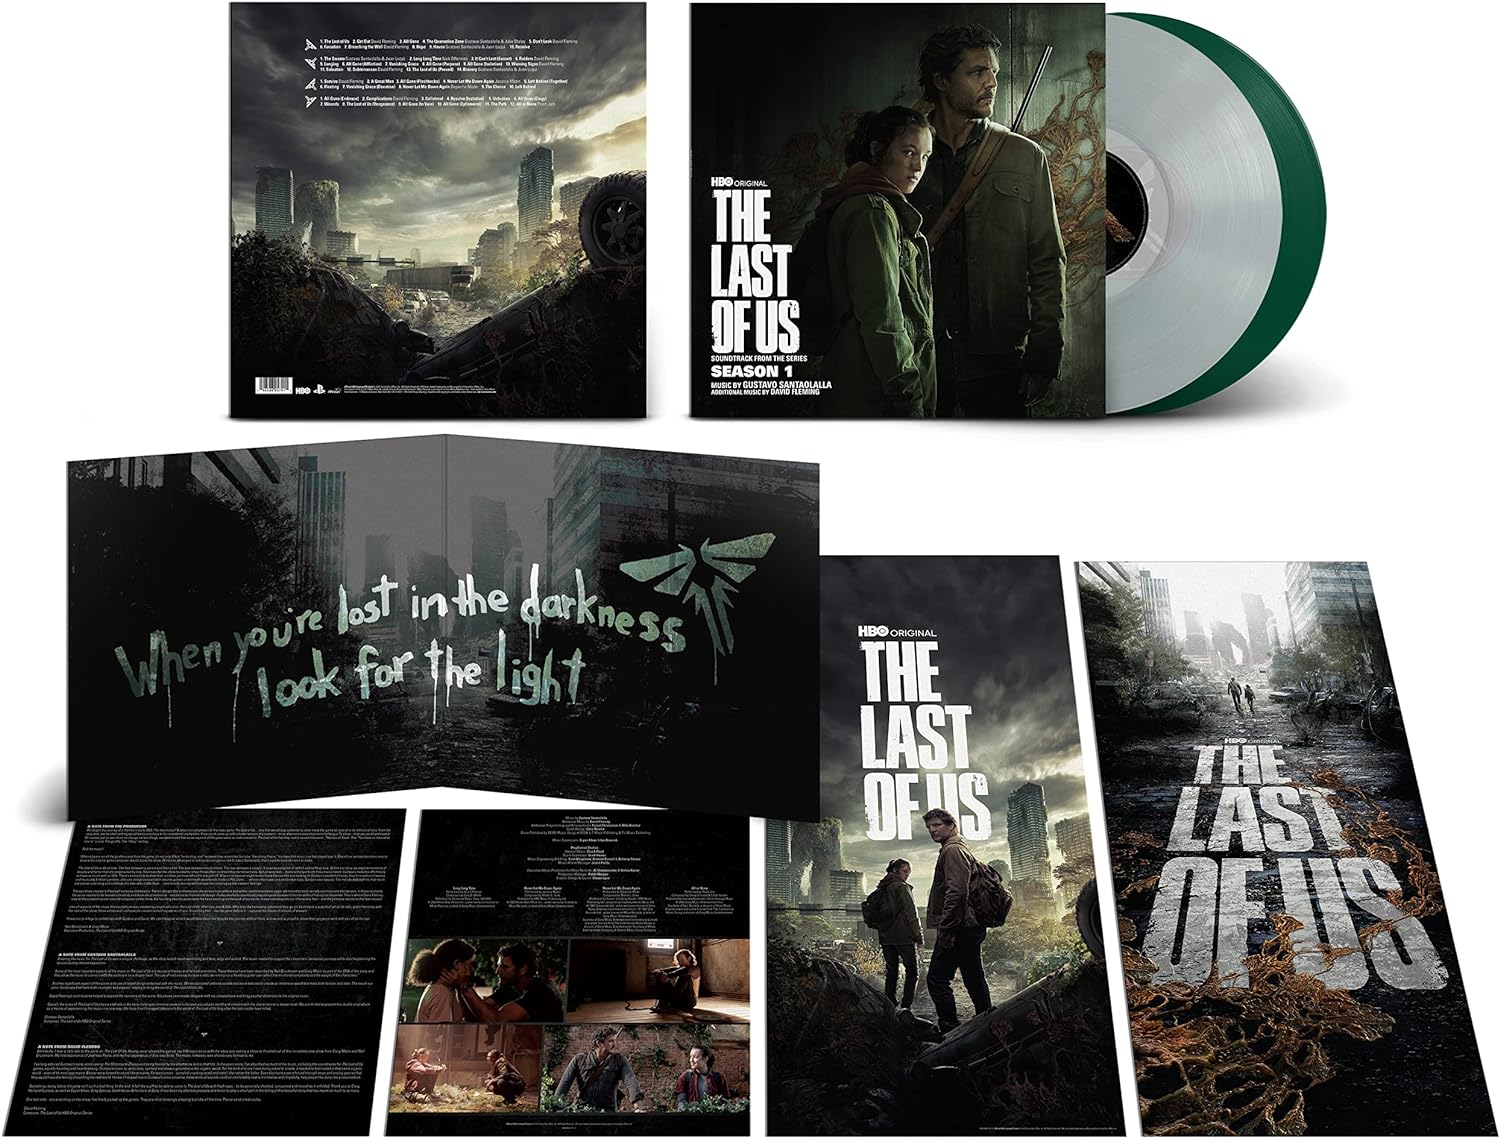 The Last Of Us: Season 1 (Soundtrack From The HBO Original Series) (Color Vinyl 2LP)